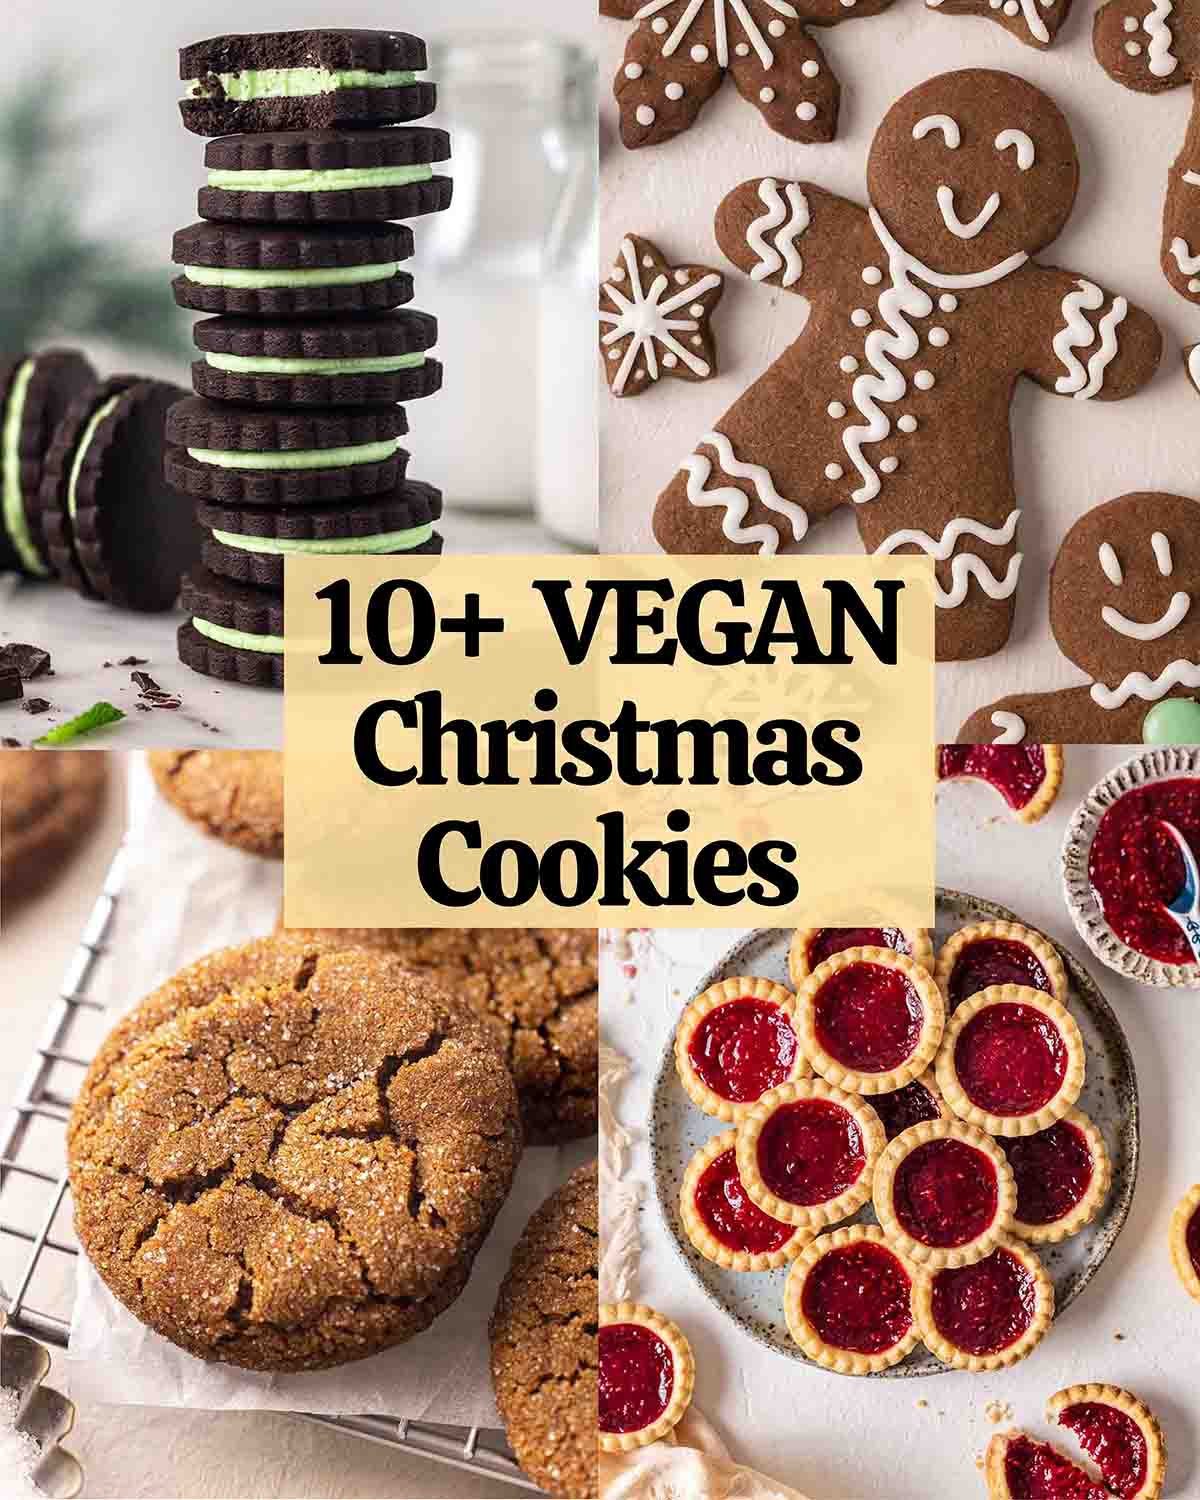 Collage of christmas cookies with text overlay that says '10+ vegan Christmas cookies'.